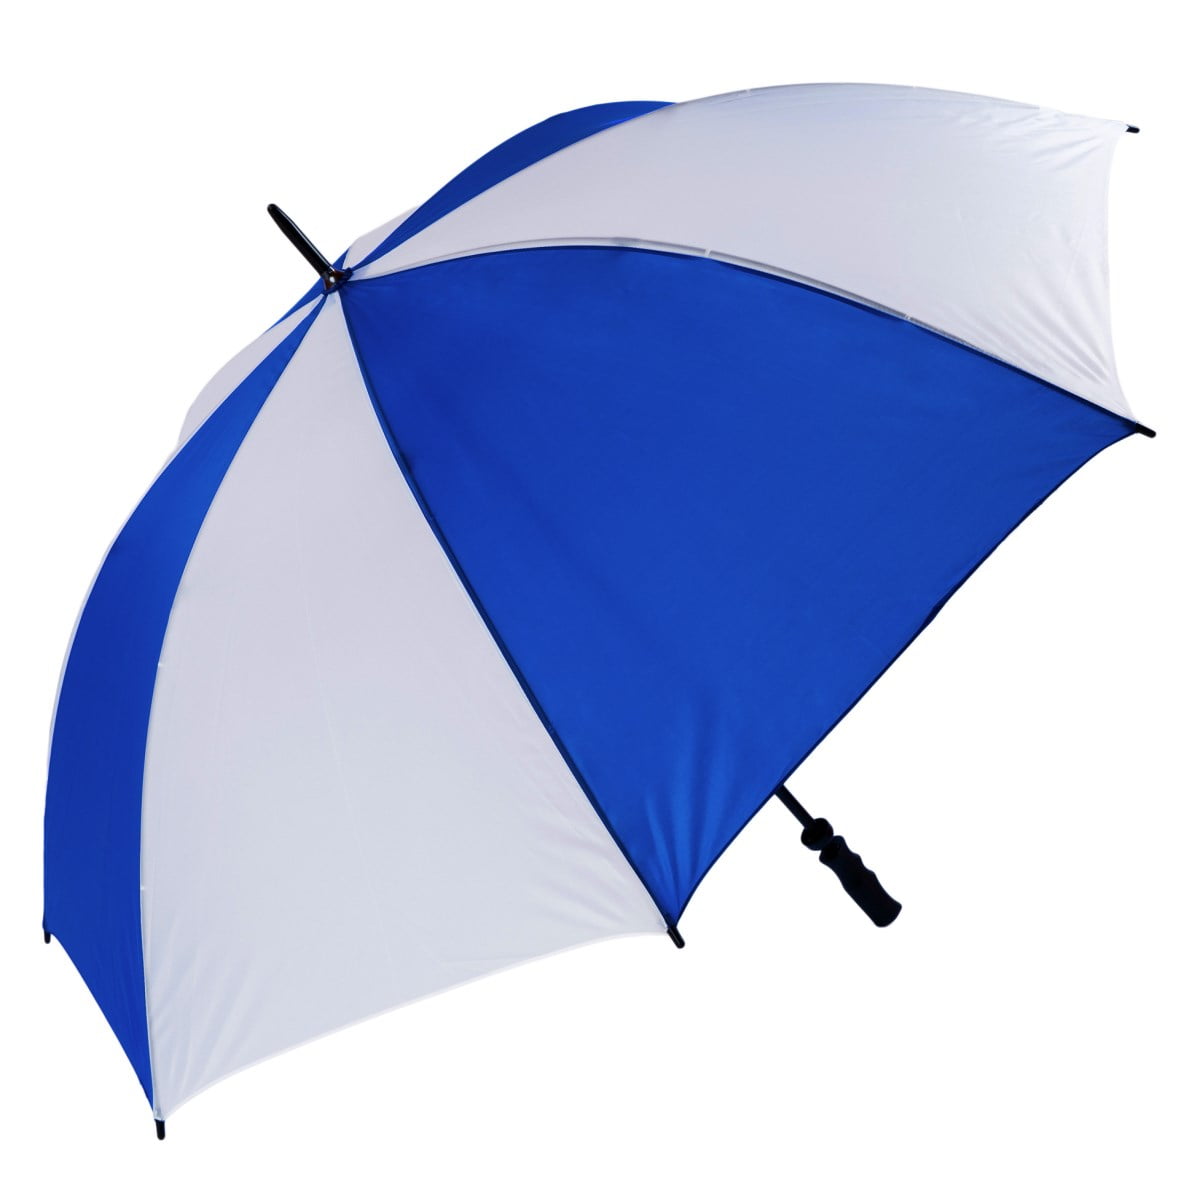 This royal blue & white golf umbrella is completely windproof